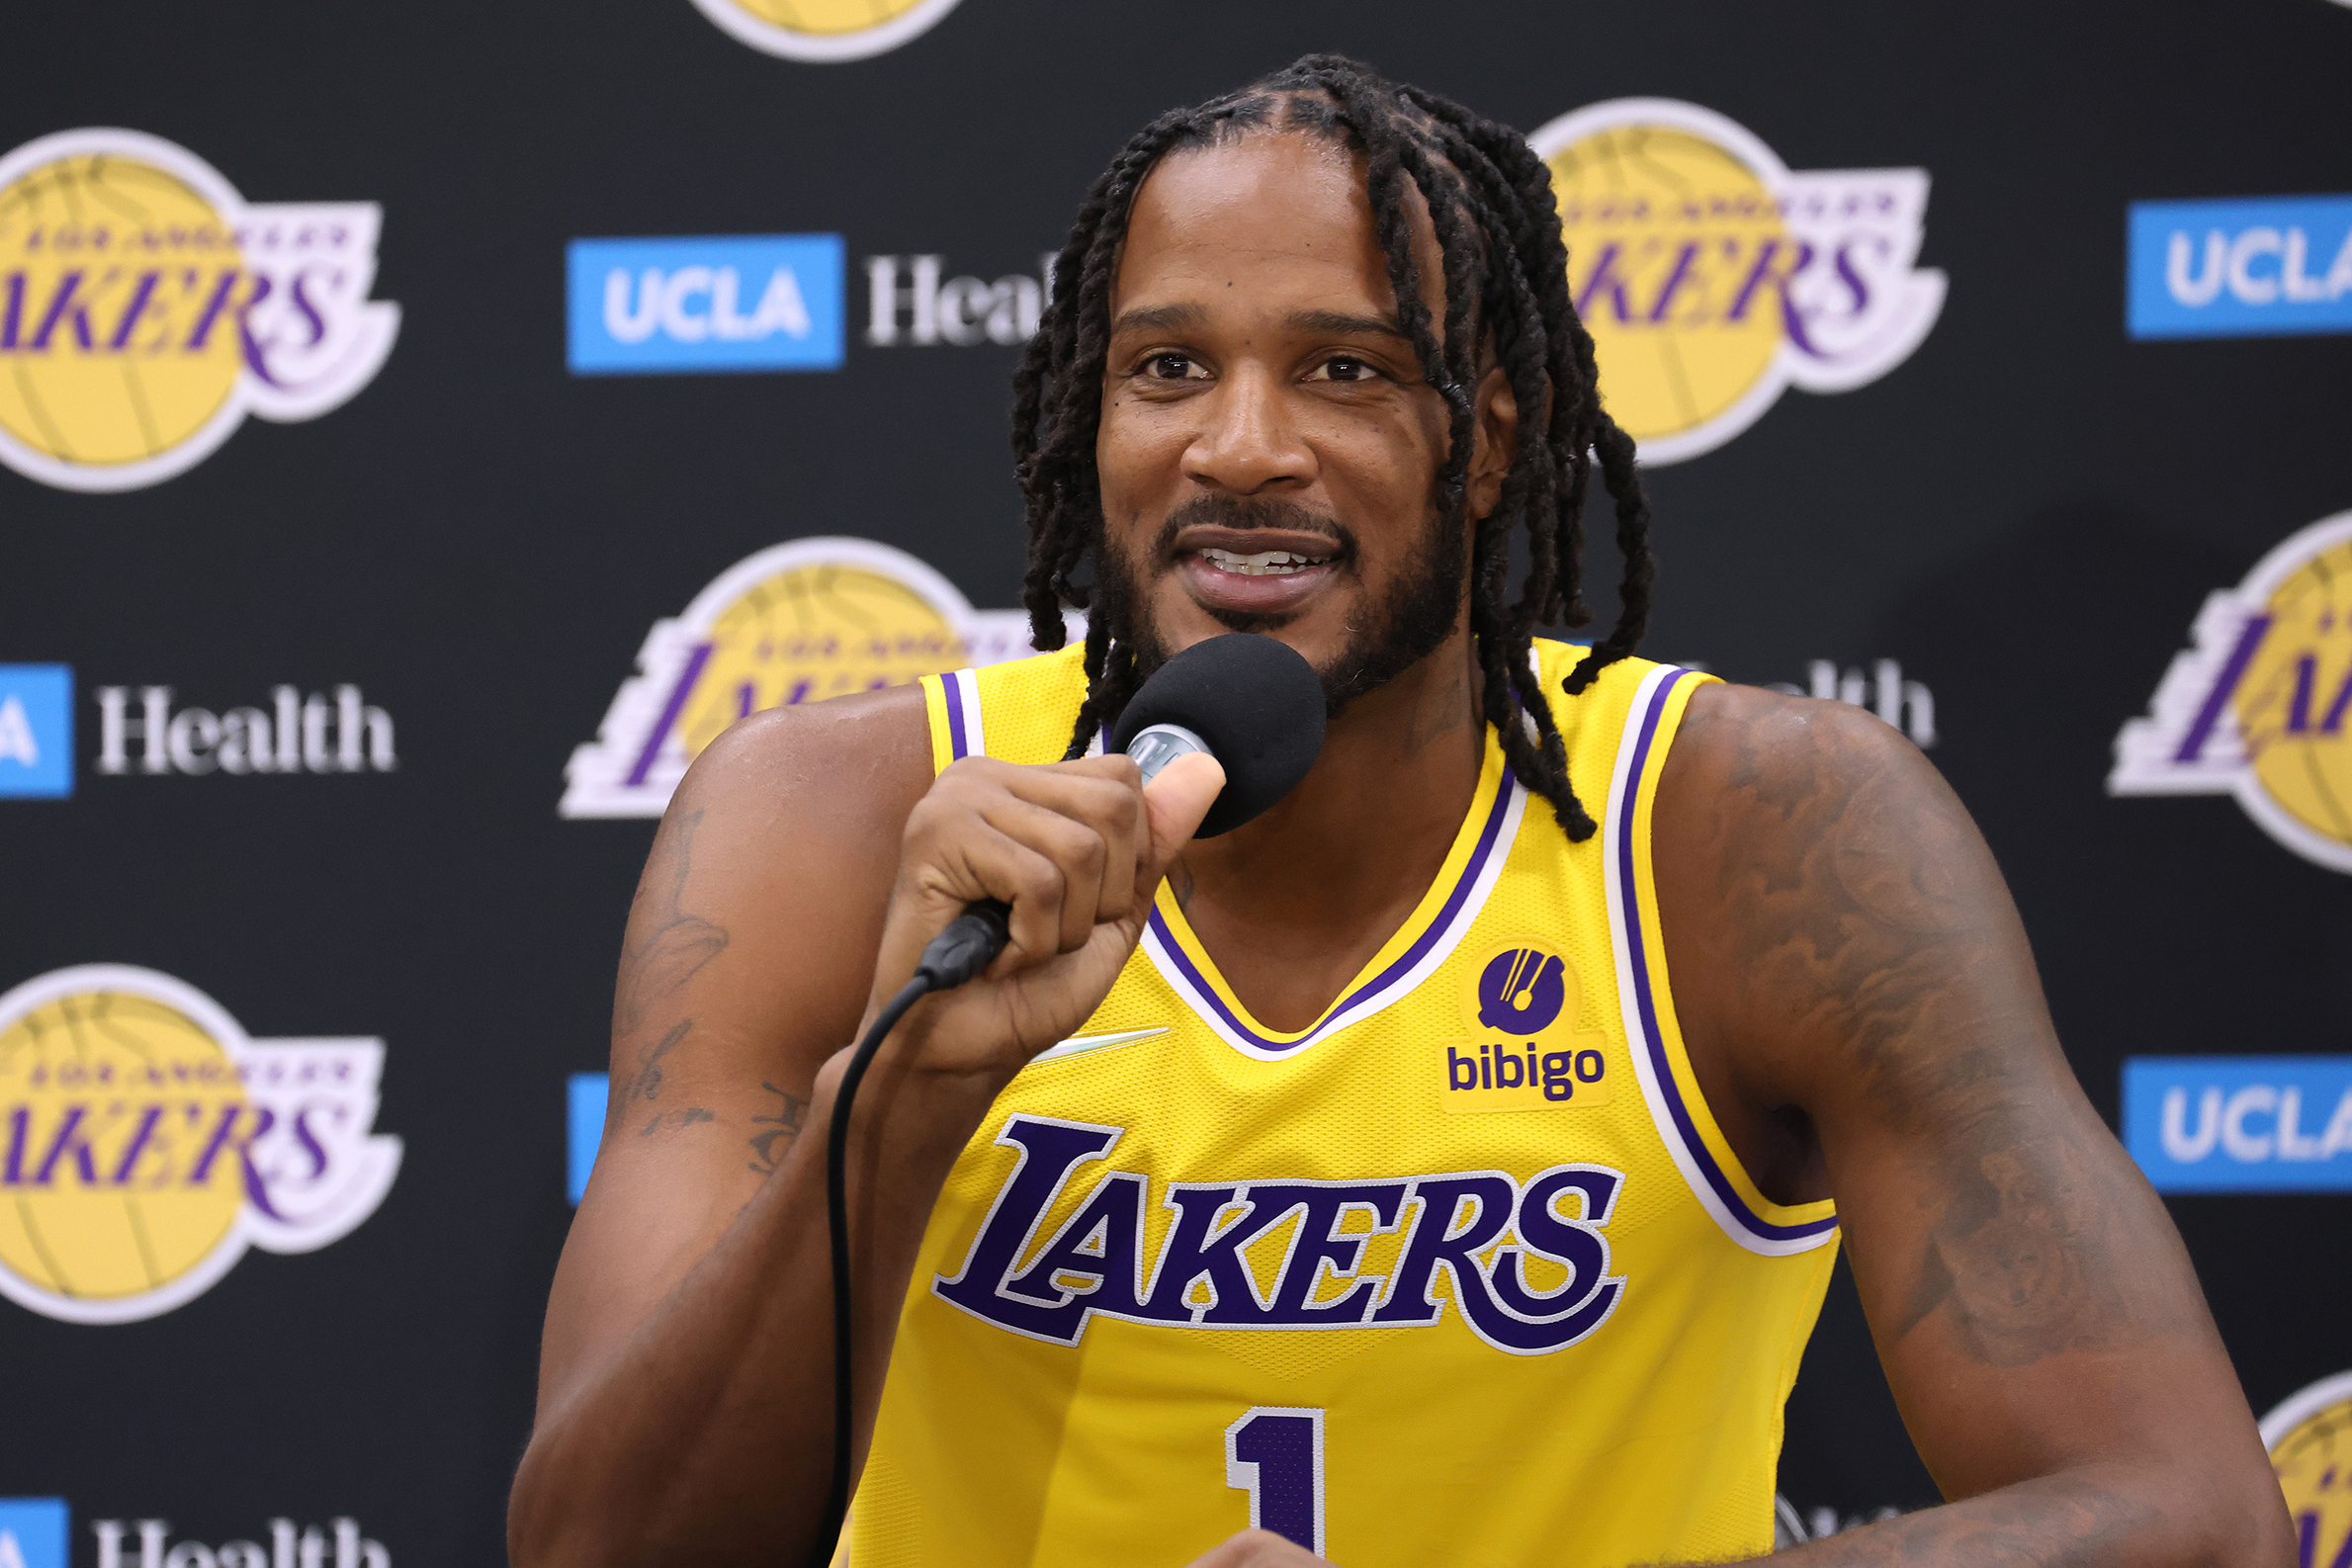 Trevor Ariza #1 of the Los Angeles Lakers smiles as he speaks to the media during Los Angeles Lakers media day at UCLA Health Training Center on September 28, 2021 in El Segundo, California.